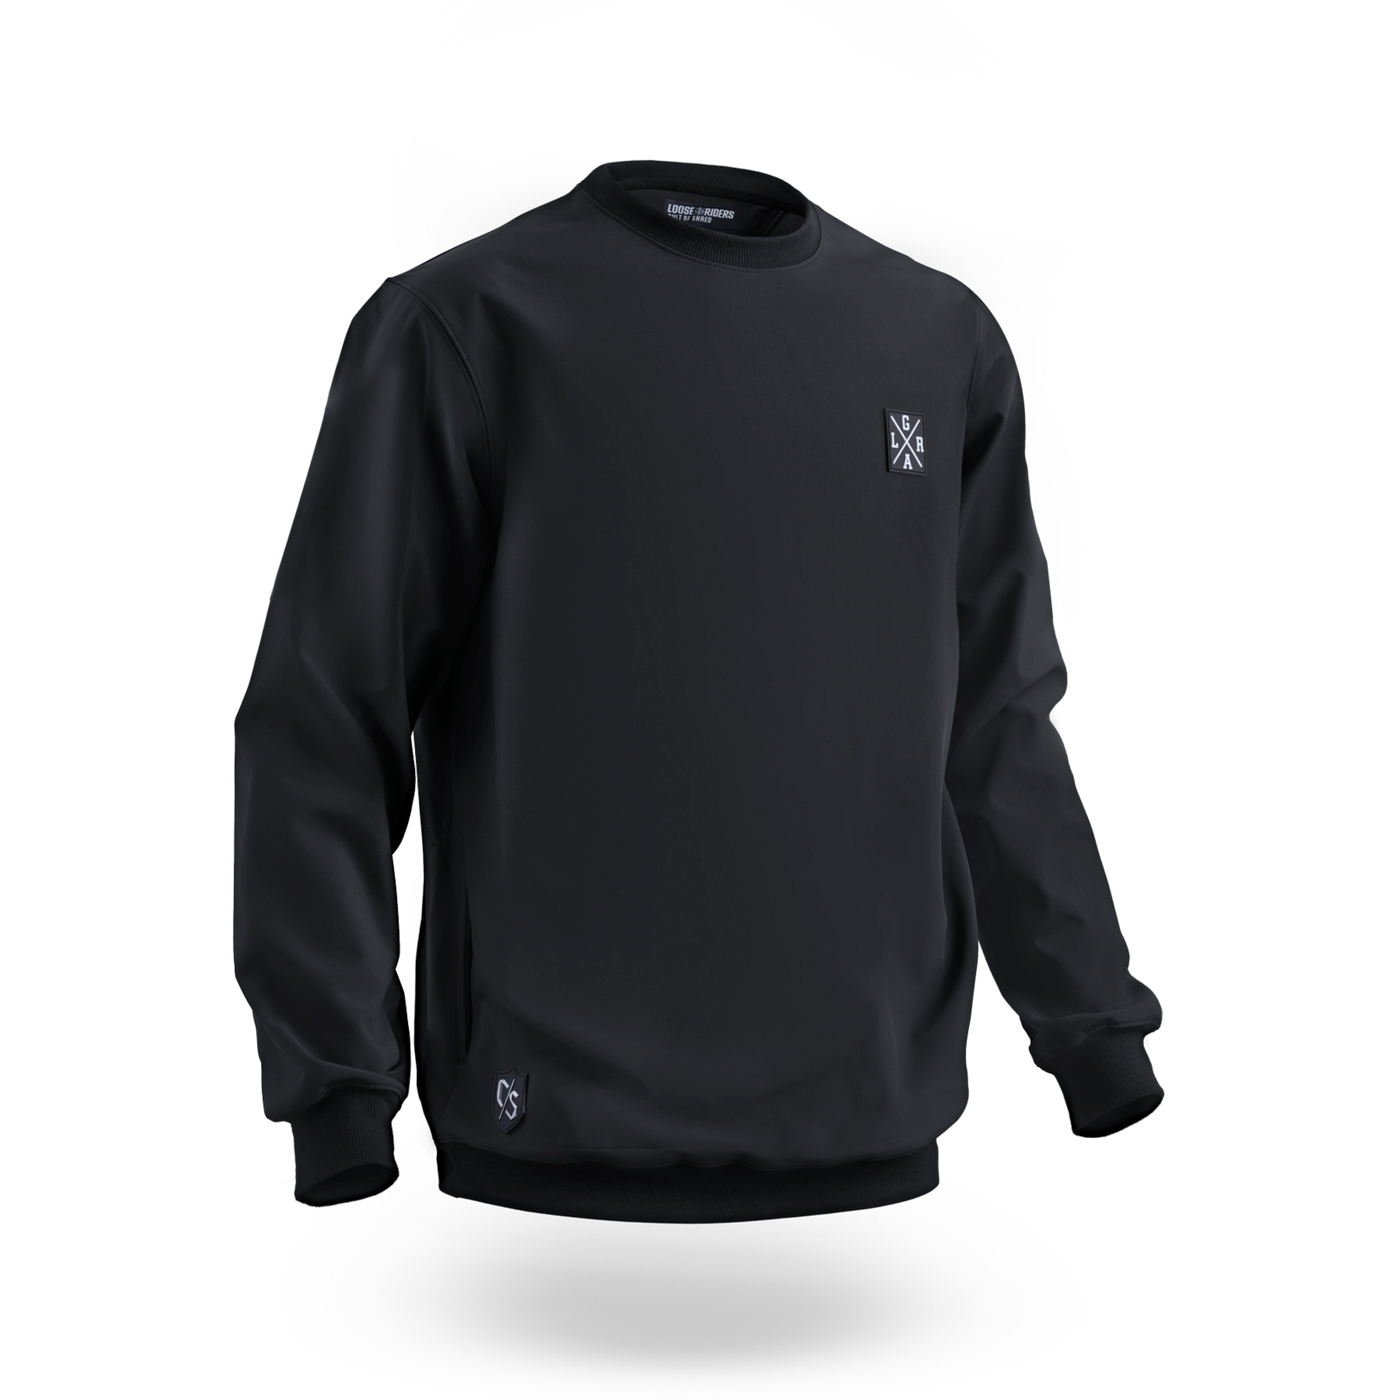 Picture of Loose Riders Softshell Crewneck - Black